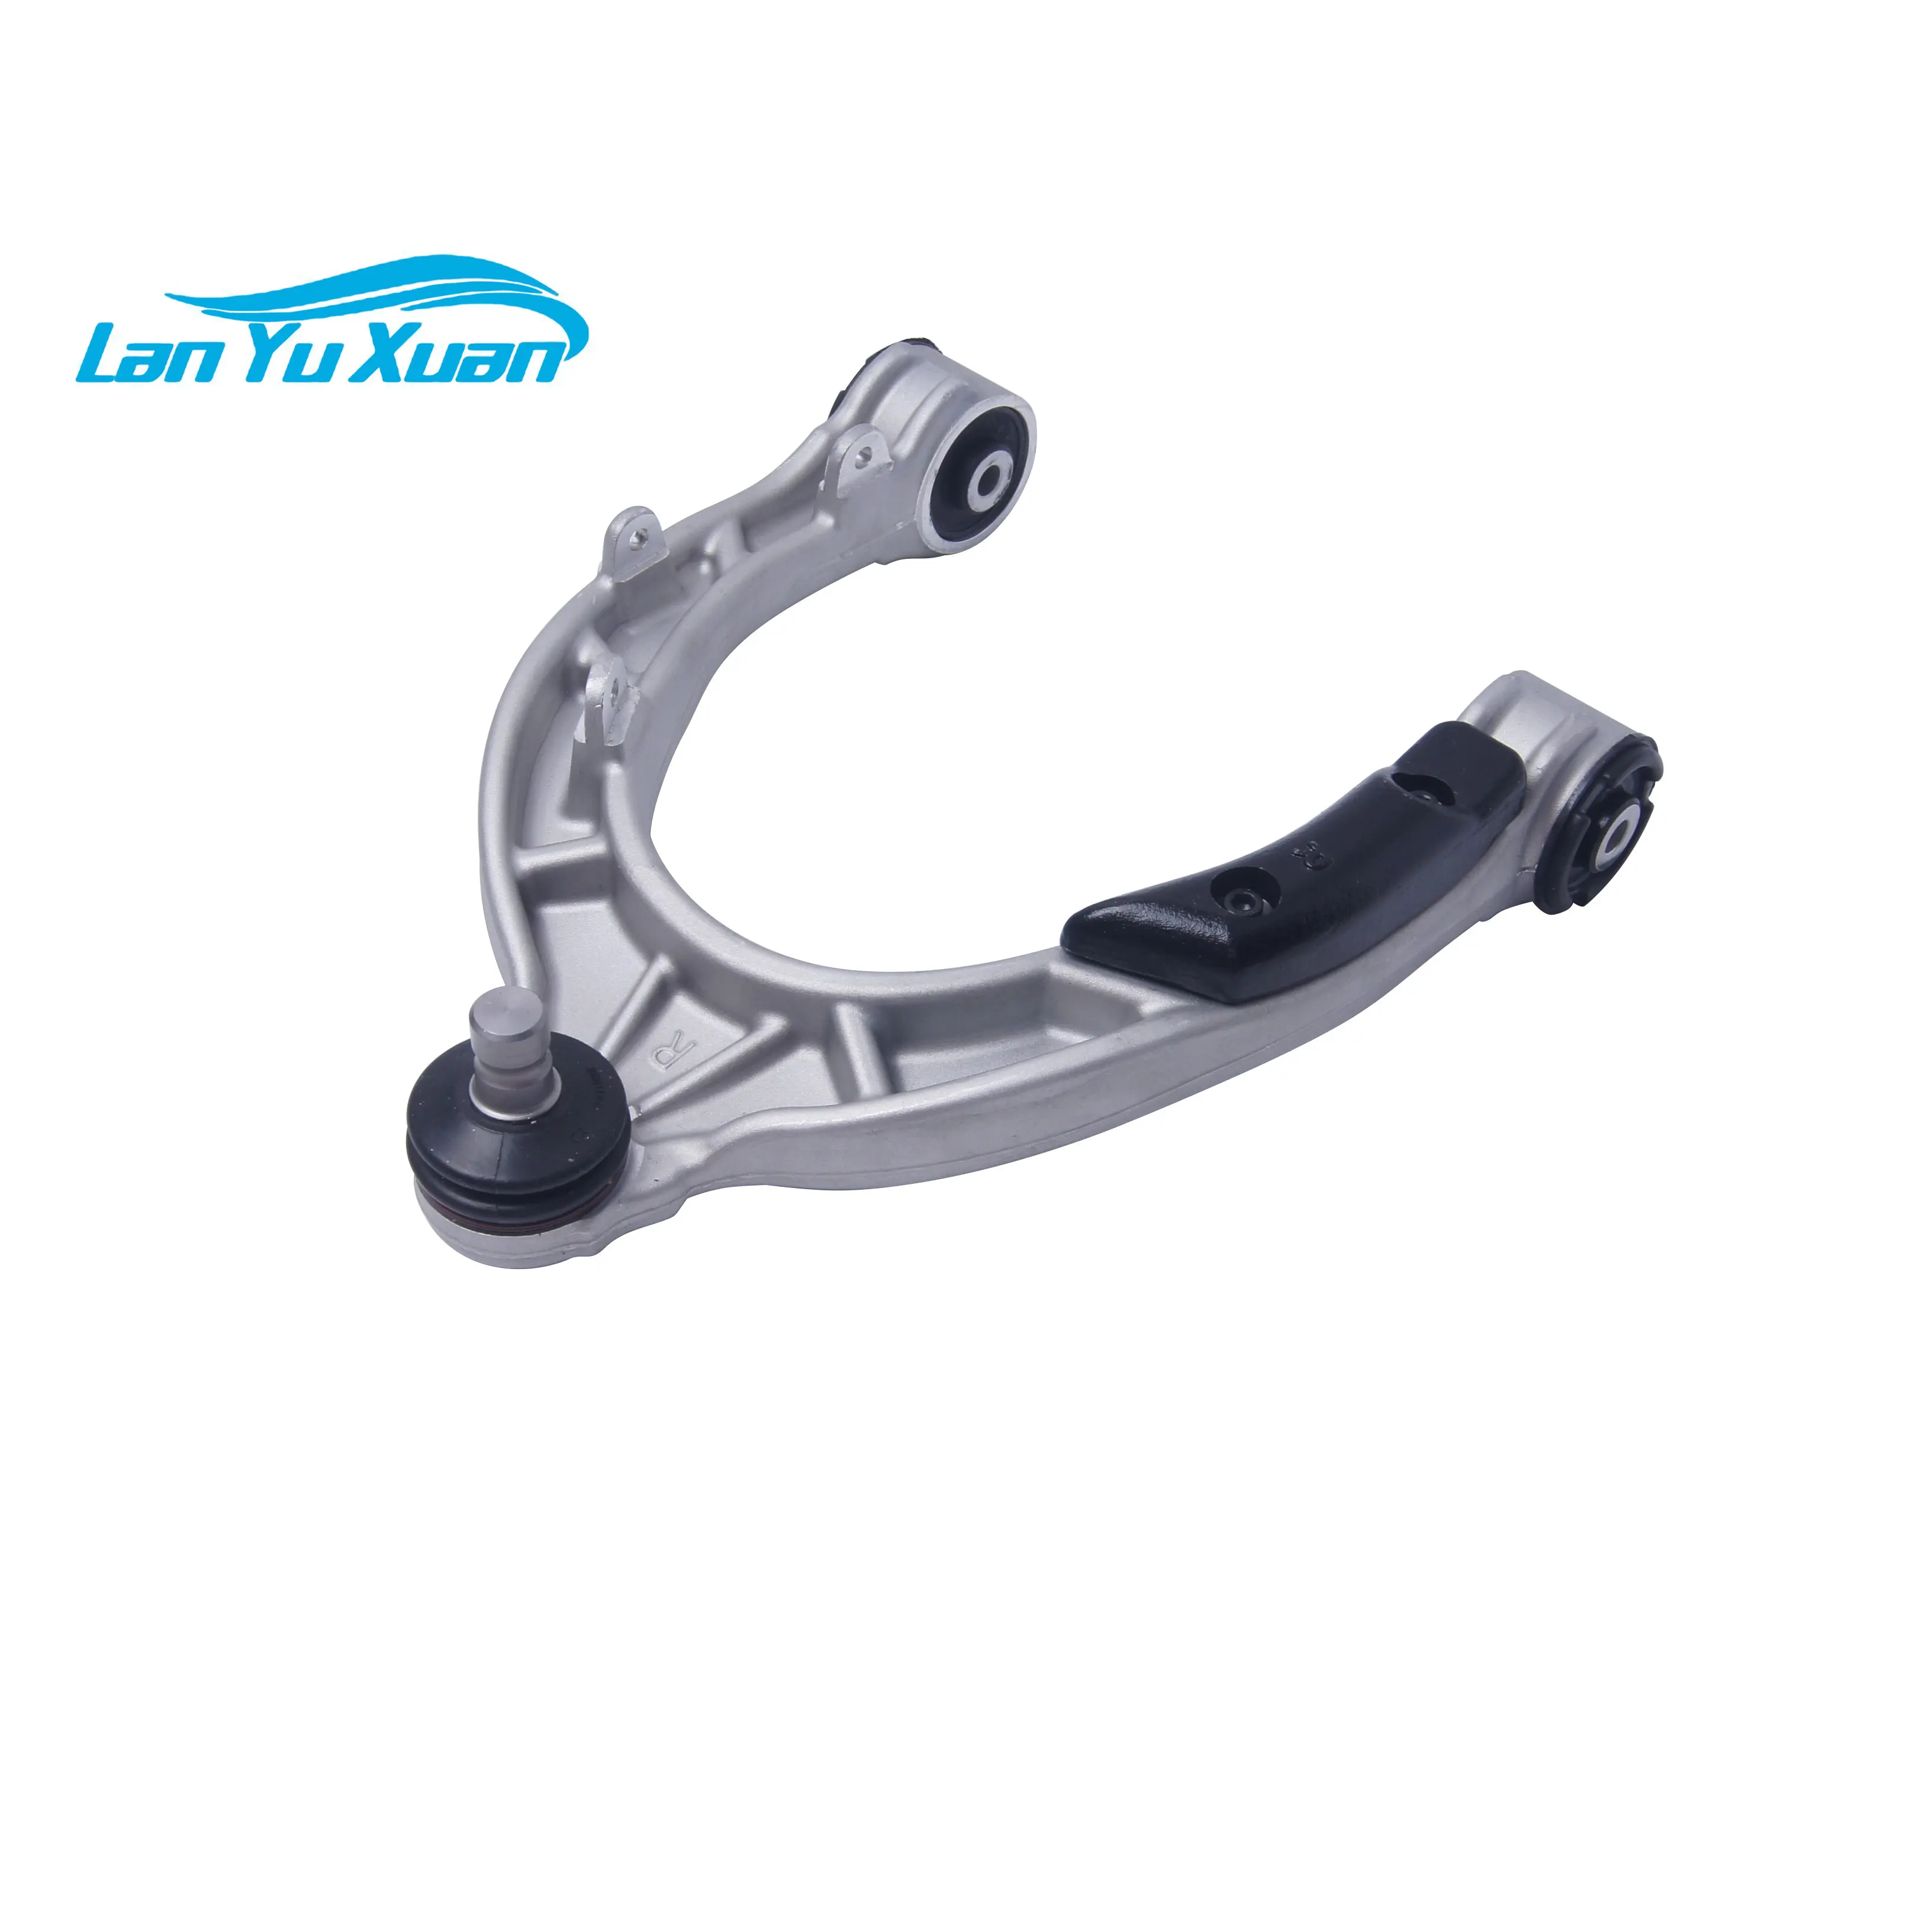 BF Brand OE 1044321-00-G 1044321-00-H Auto Suspension System Front Aluminum Control Arm for  Model 3 maisto 1 12 kawasaki ninja kx450f motorcycle classic brand authentic licensed die casting model collectible gift toy